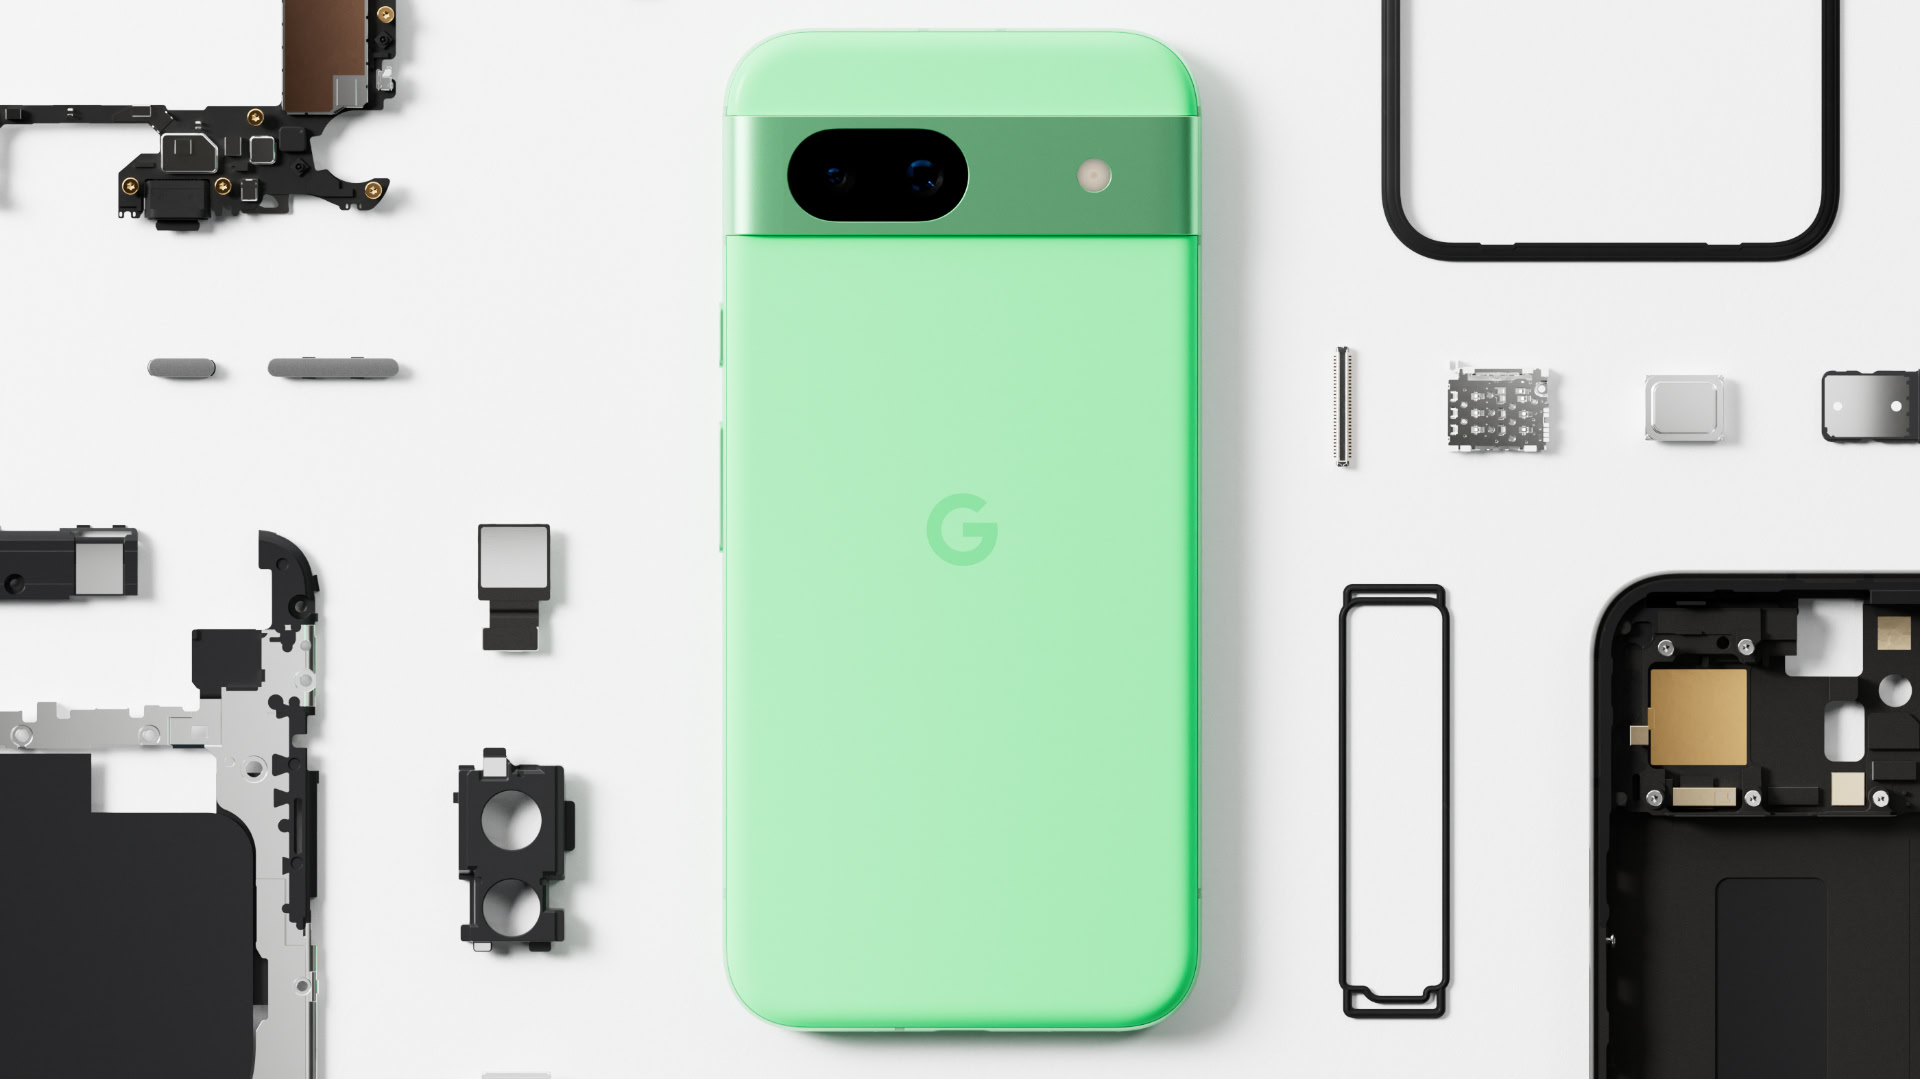 The Pixel 8a can also be located through Find My Device when it’s out of battery